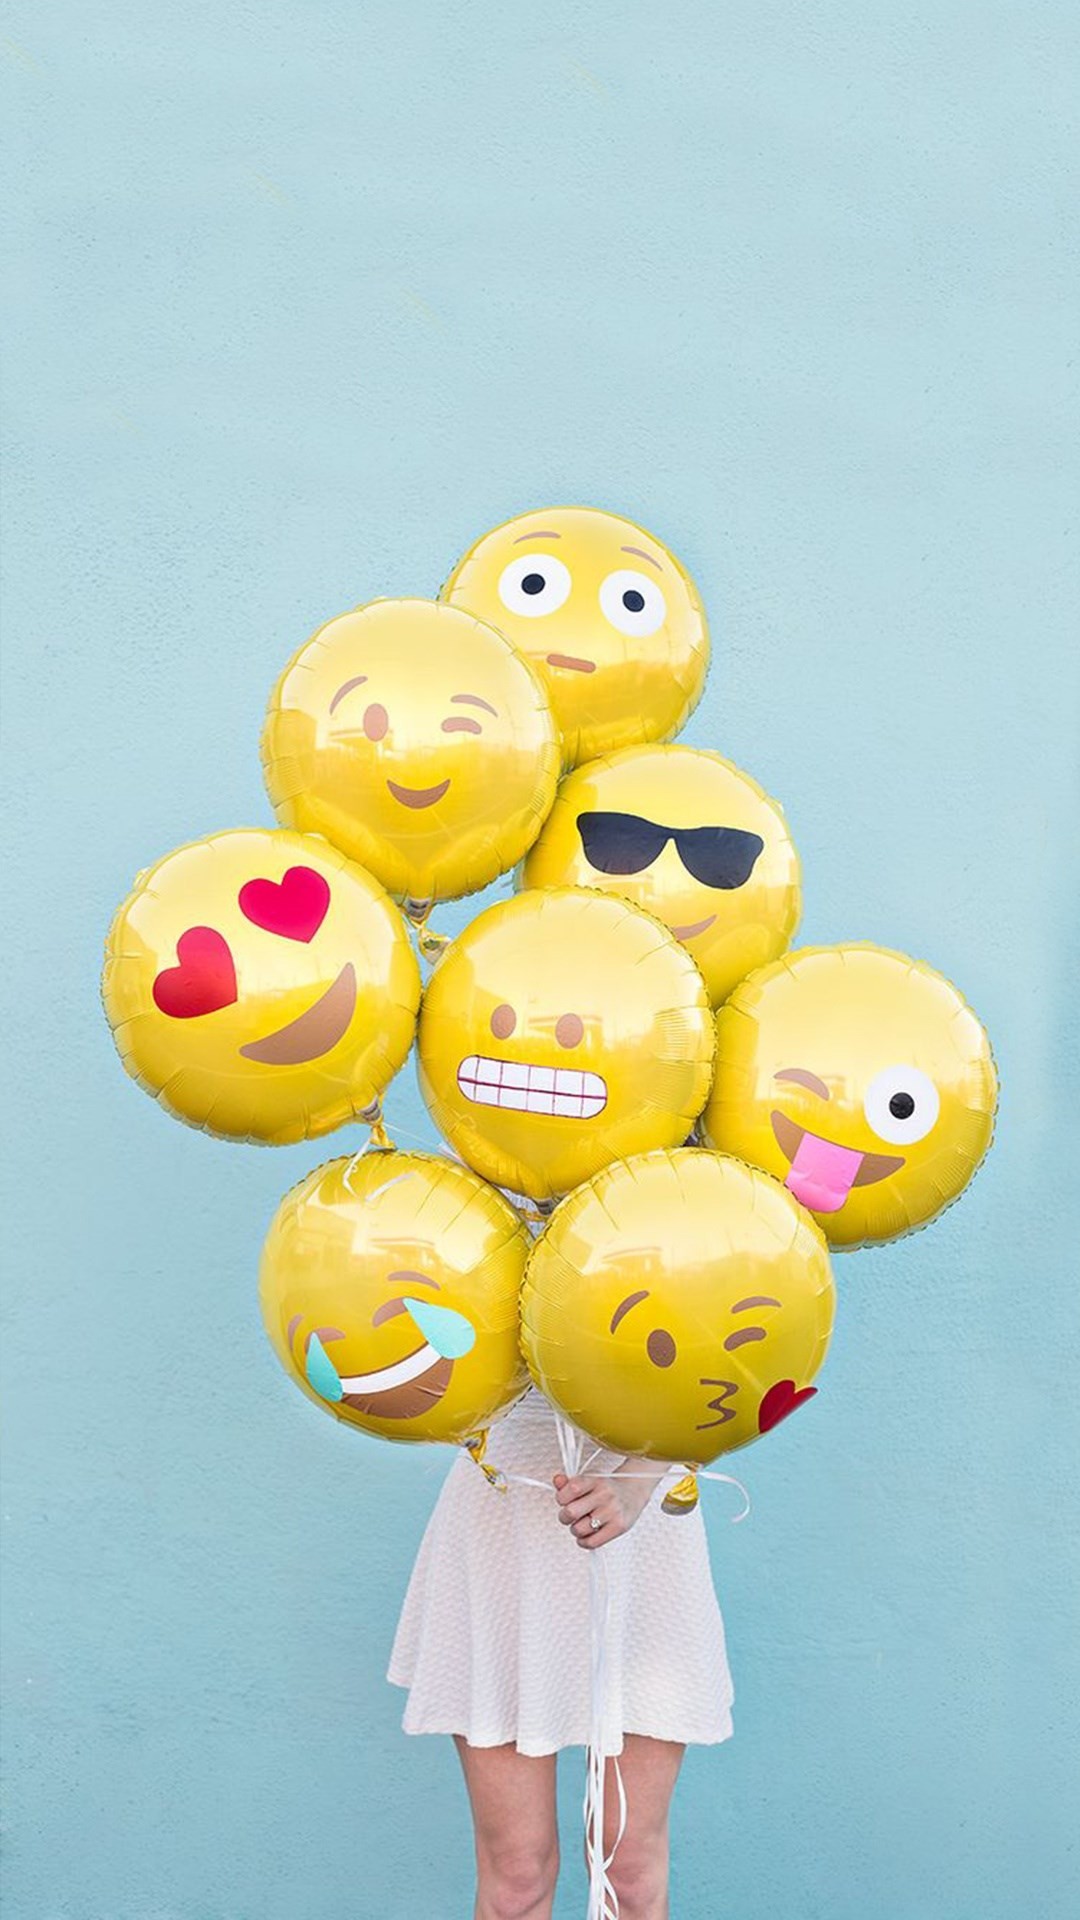 1080x1920 Abstract Funny Cute Emoji Balloons #iPhone #6 #plus #wallpaper